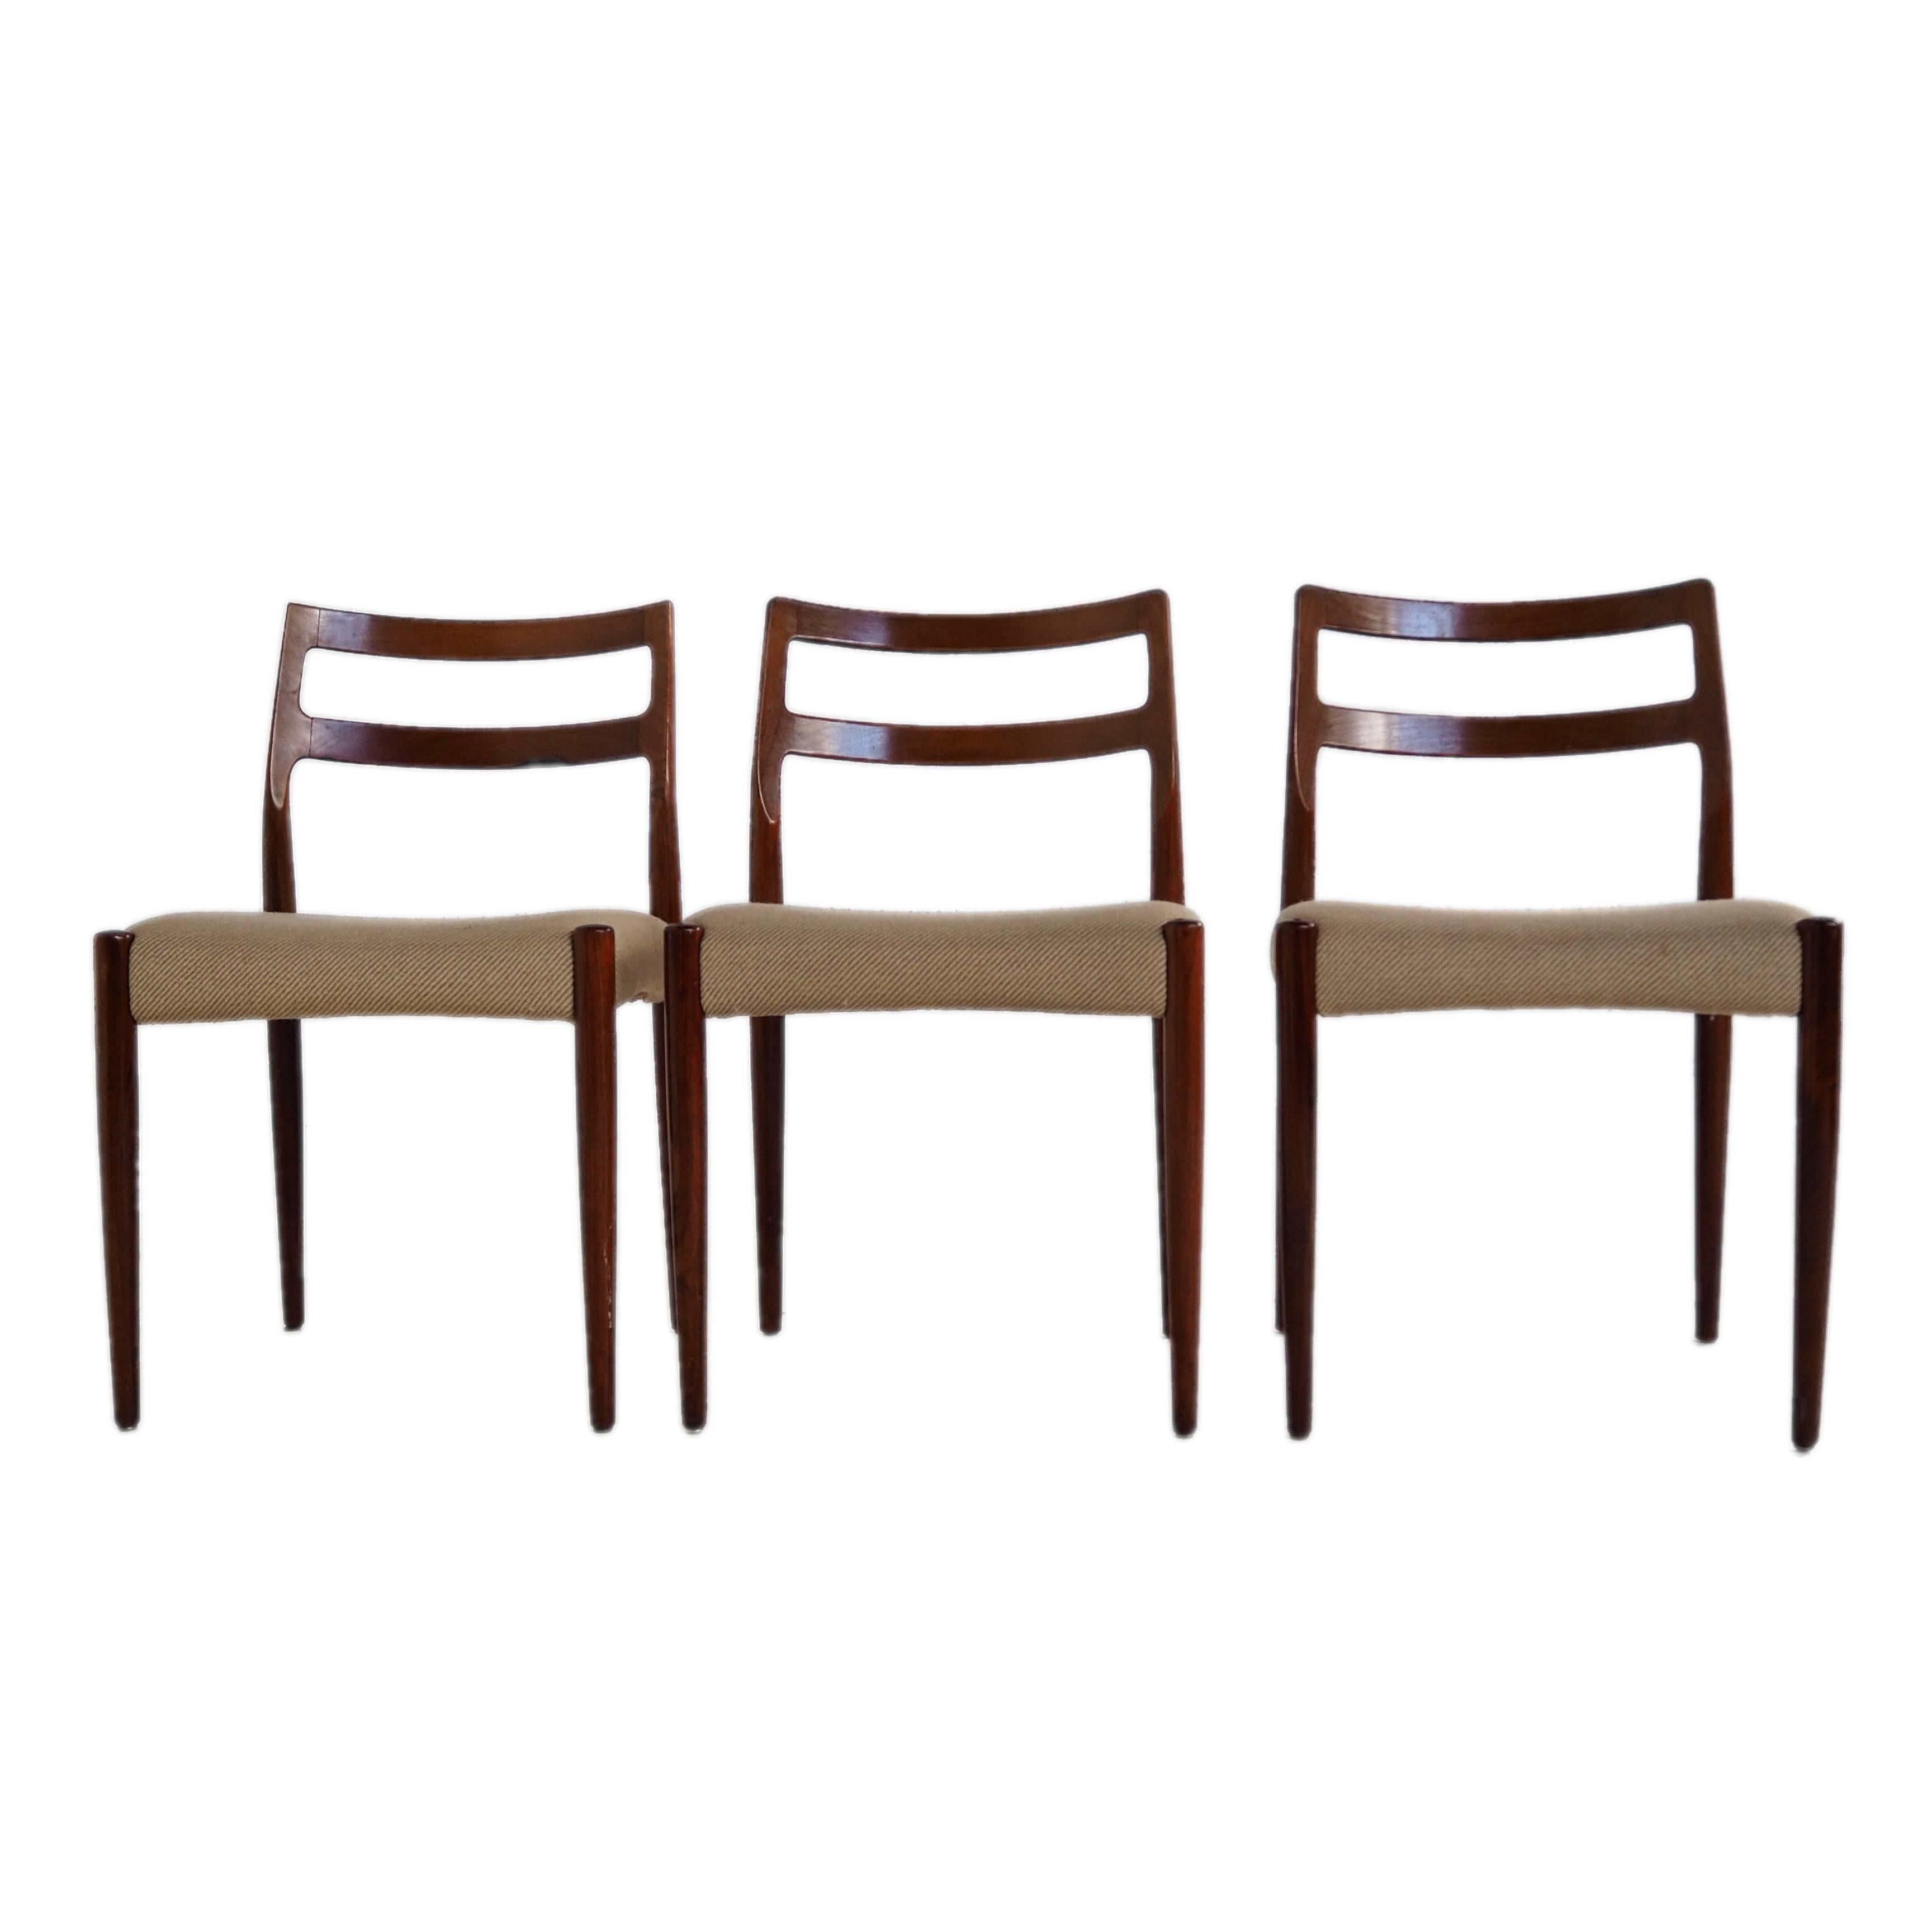 Beautiful set of three dining chairs by Johannes Andersen for Uldum Møbelfabrik.
Organic shape made from solid teak wood, in its original wool upholstery.